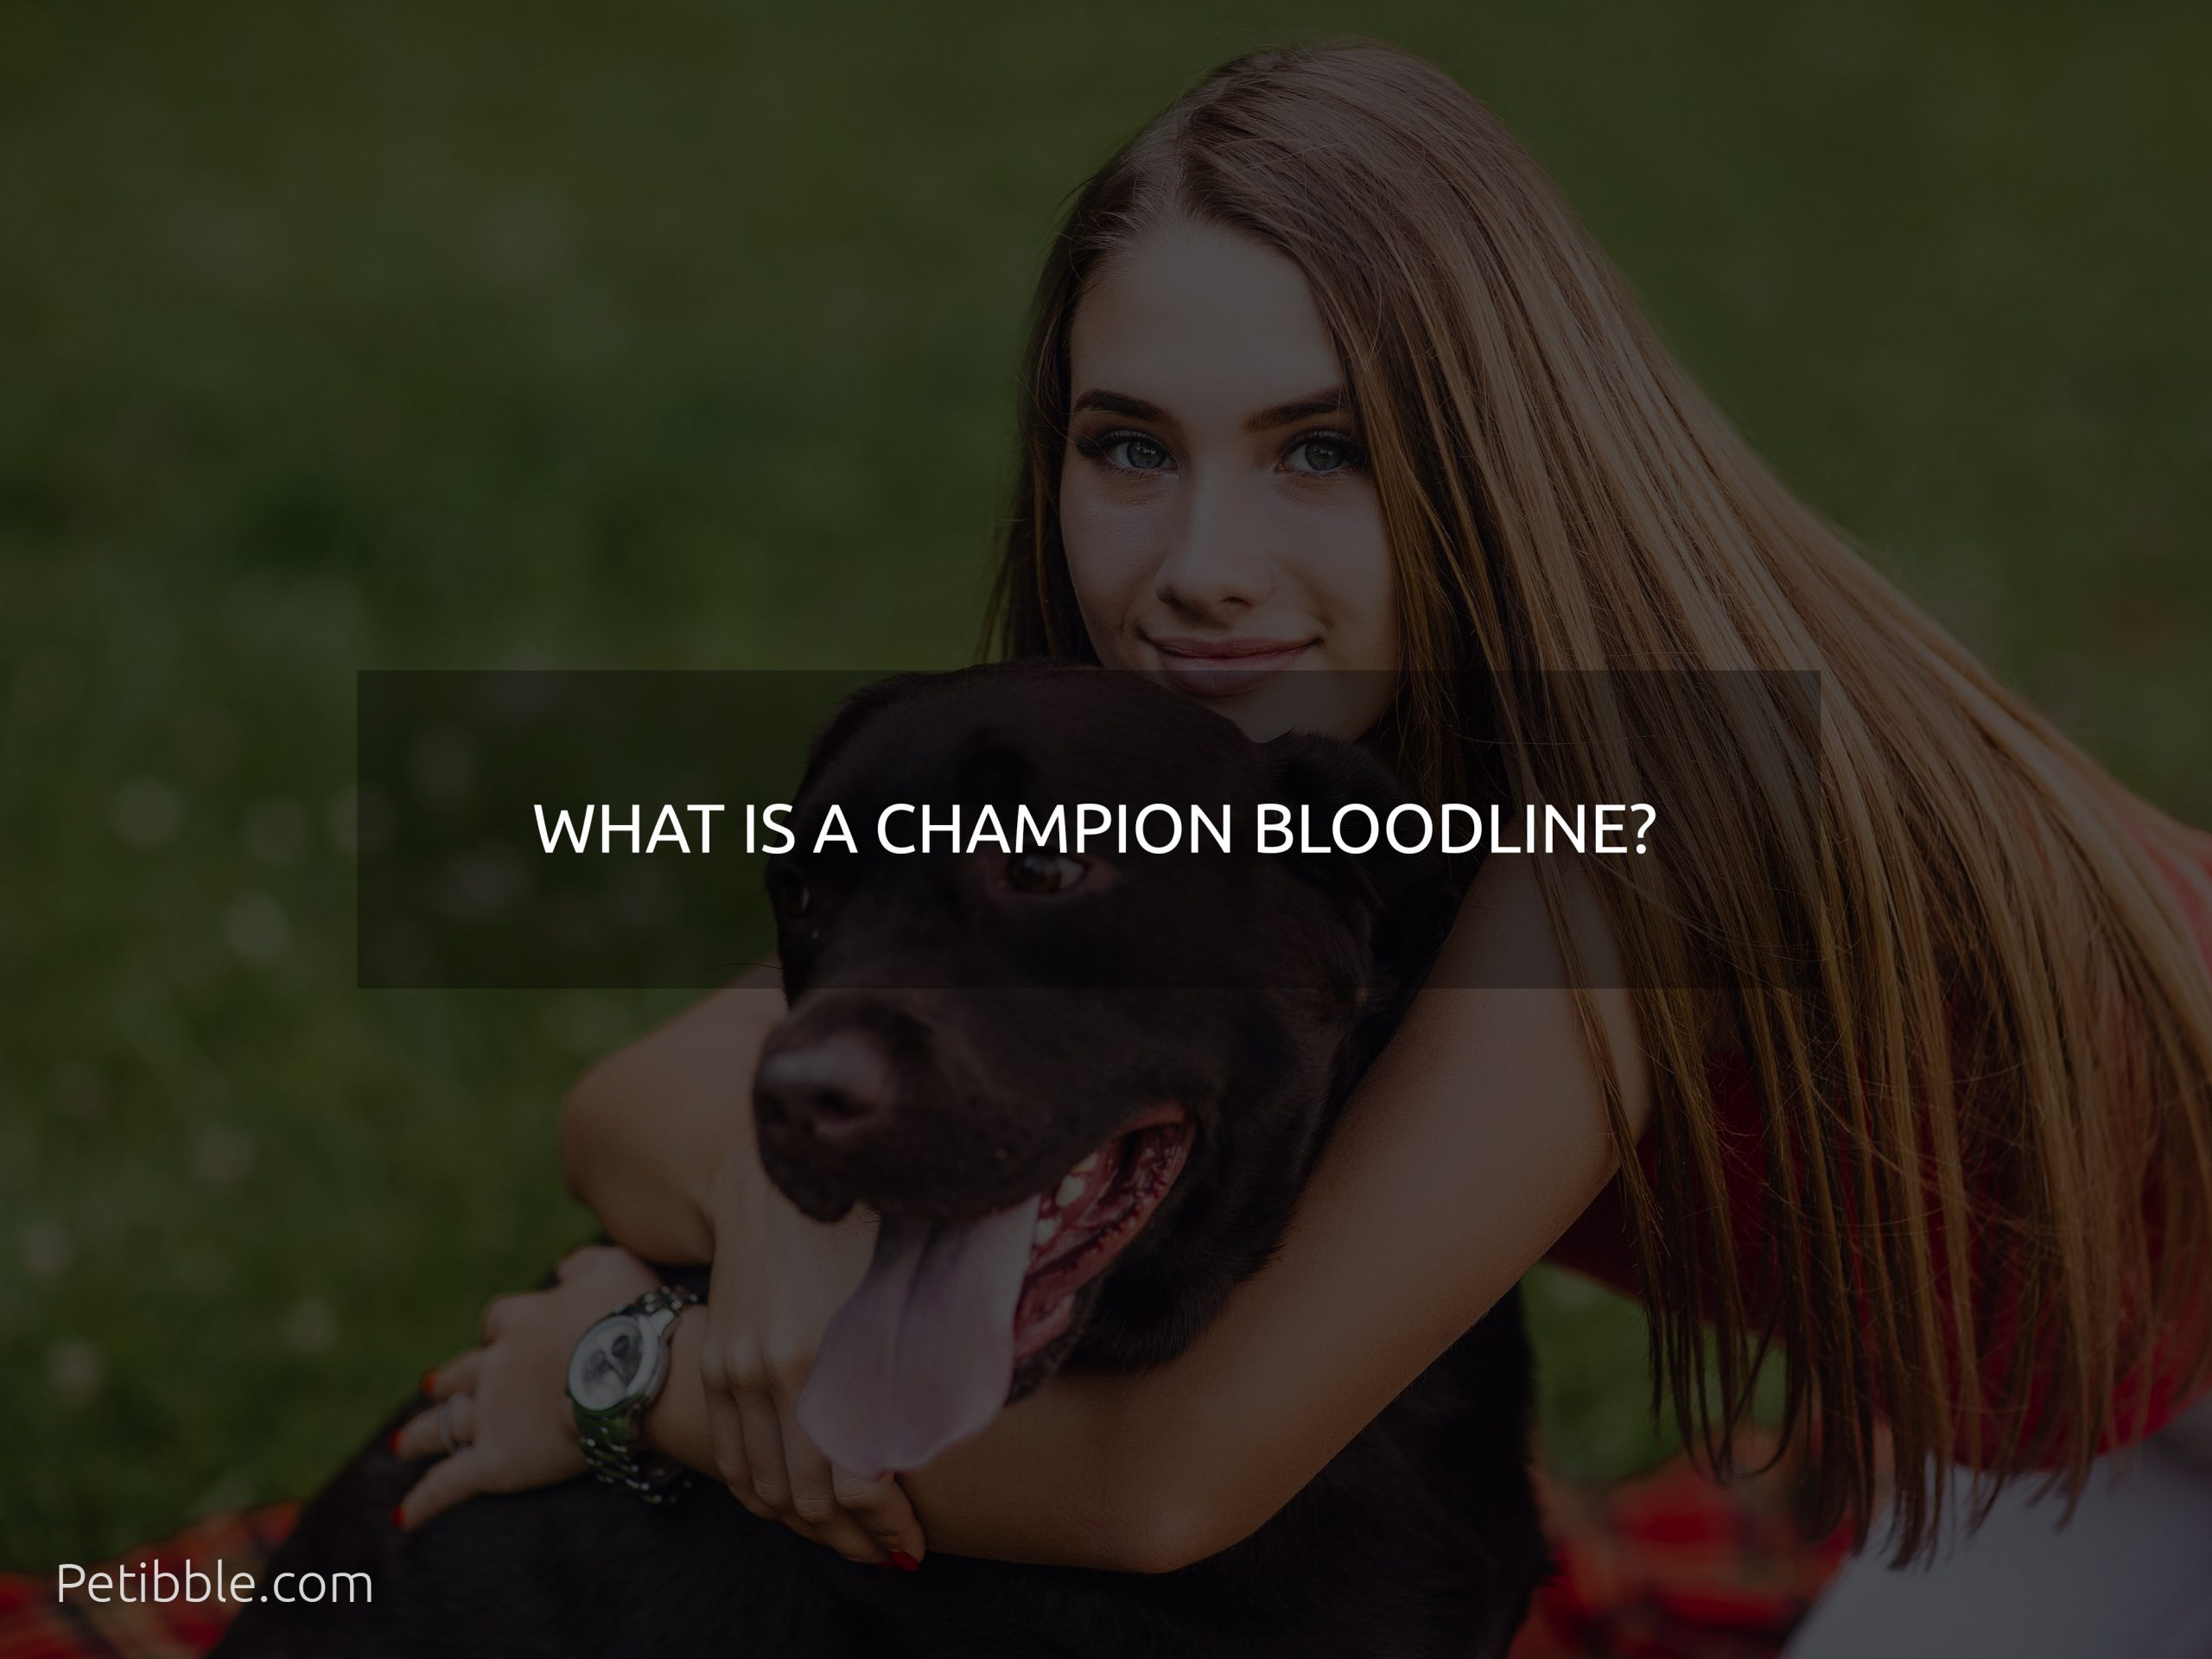 What is a champion bloodline?